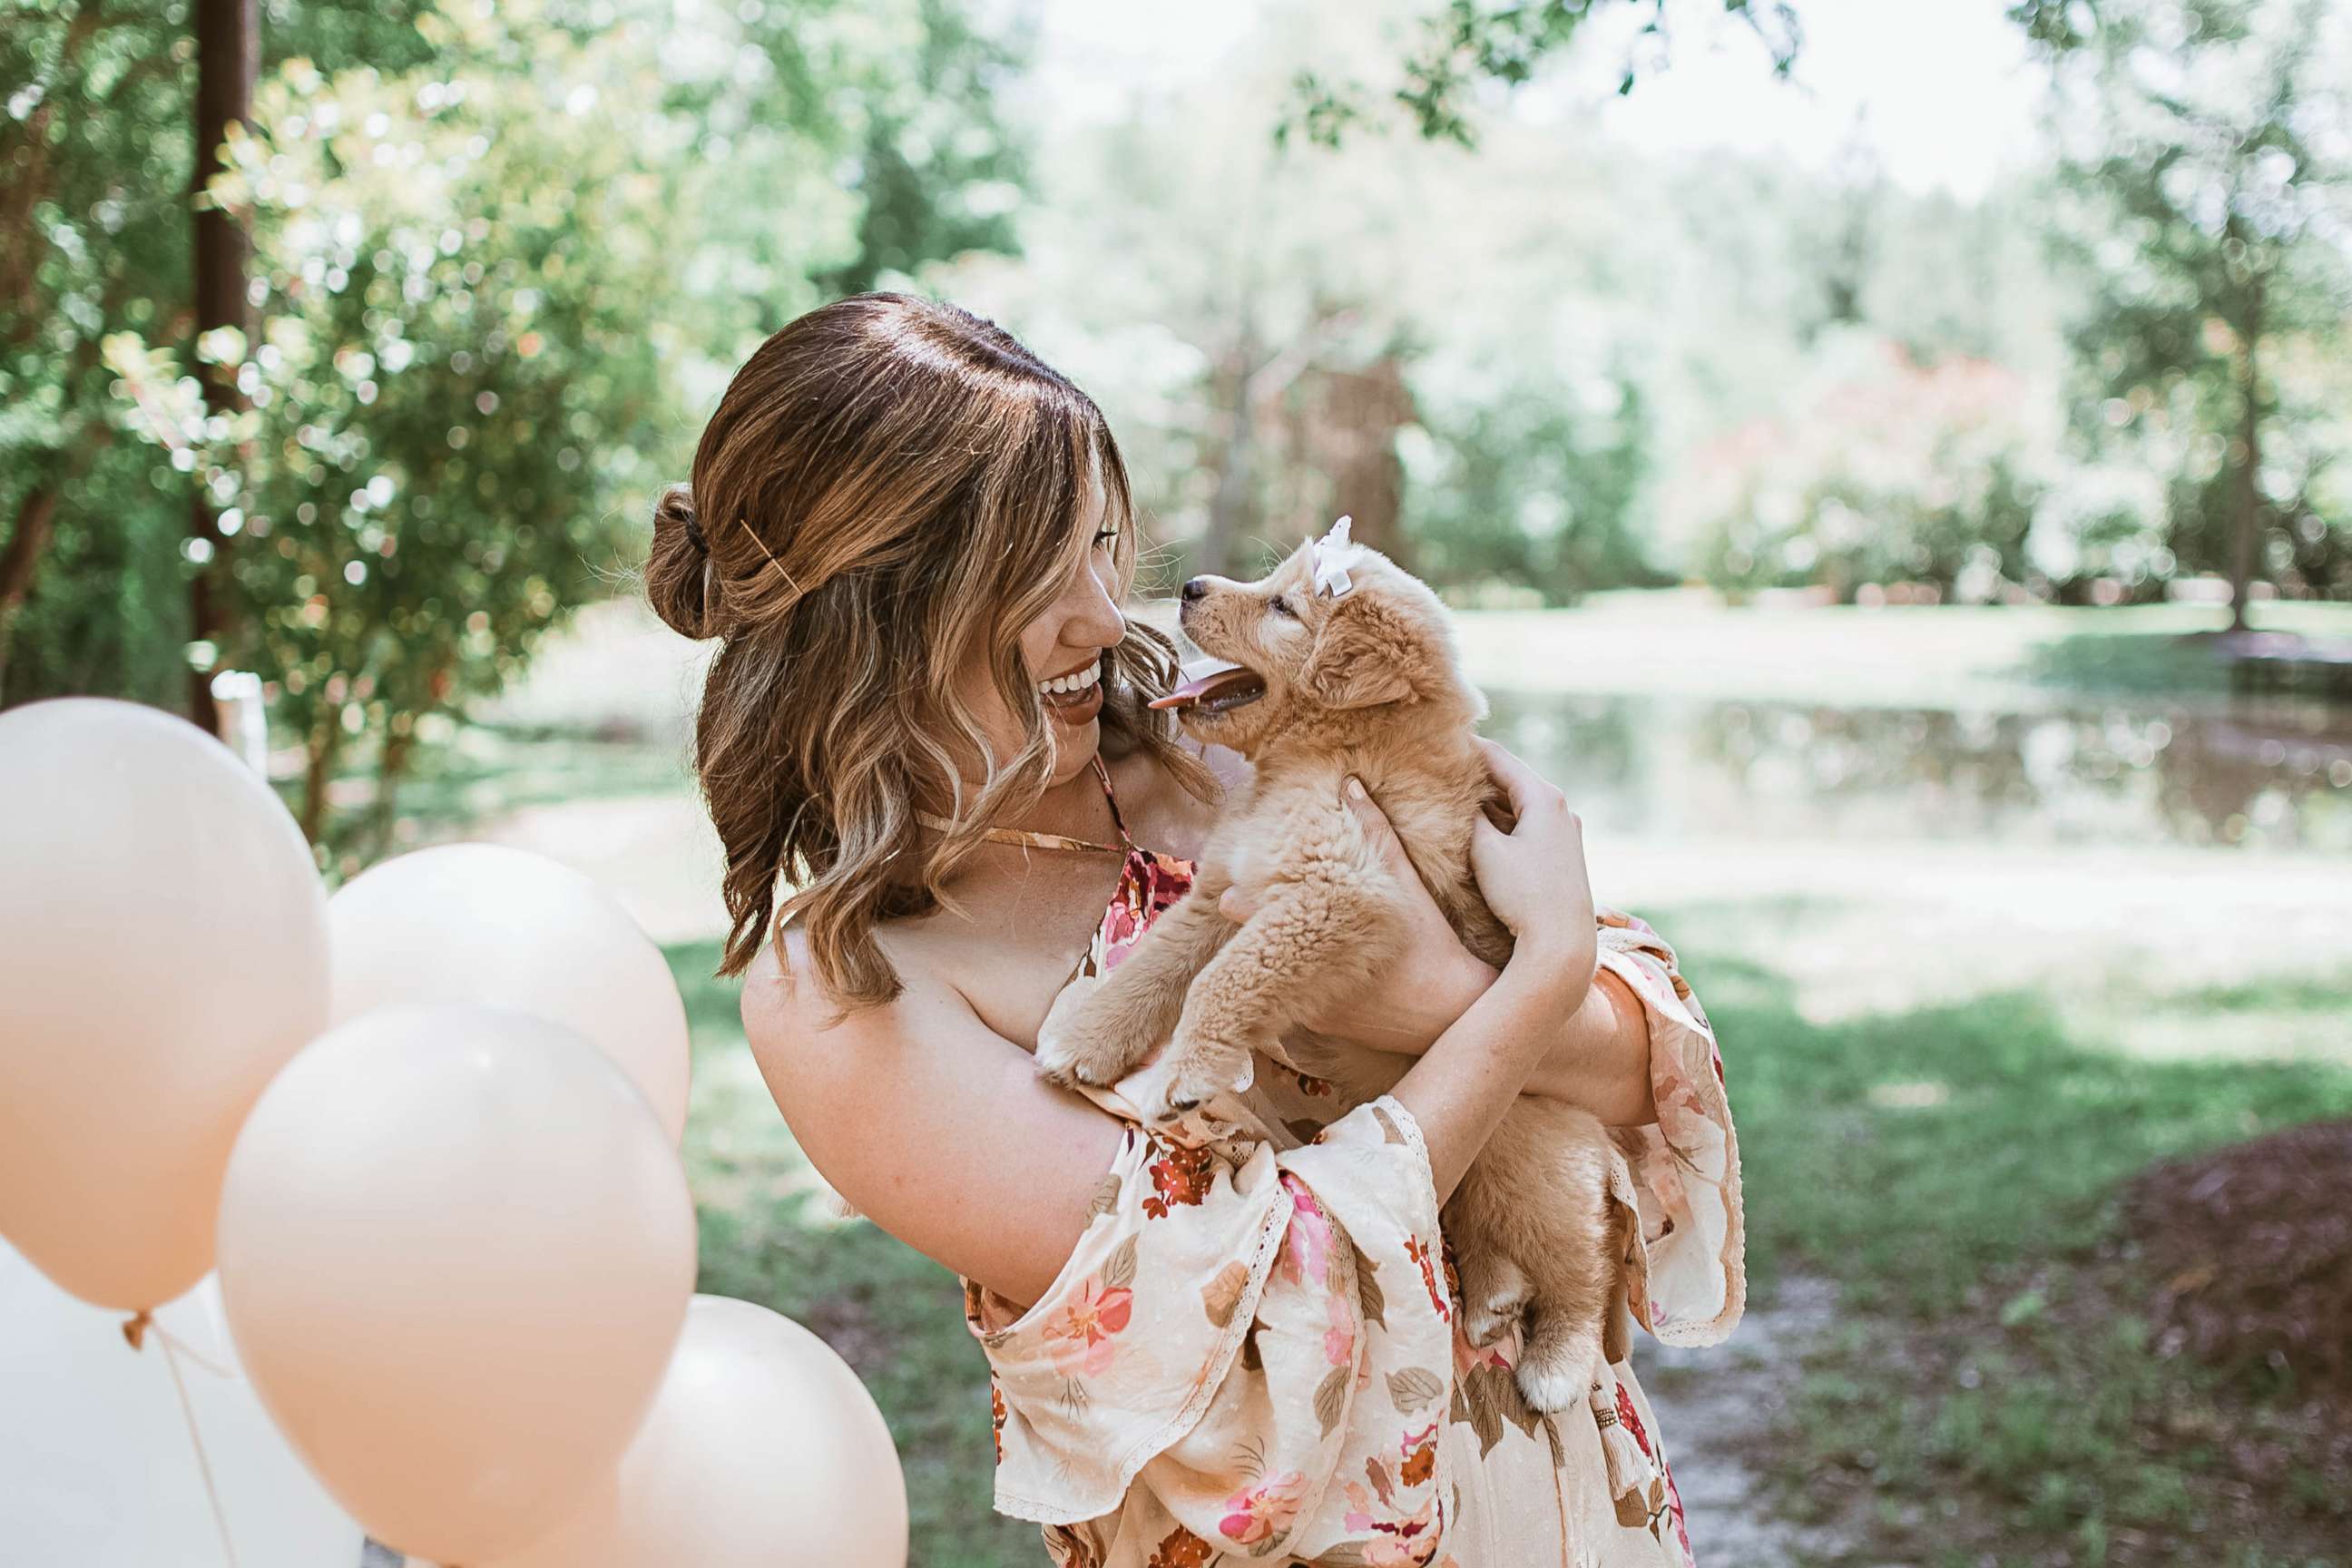 PHOTO: Joy Stone, 25, of Melissa, Texas, was photographed with her new dog, who she named the Rey, in a gender-reveal-style photo shoot in May 2018.